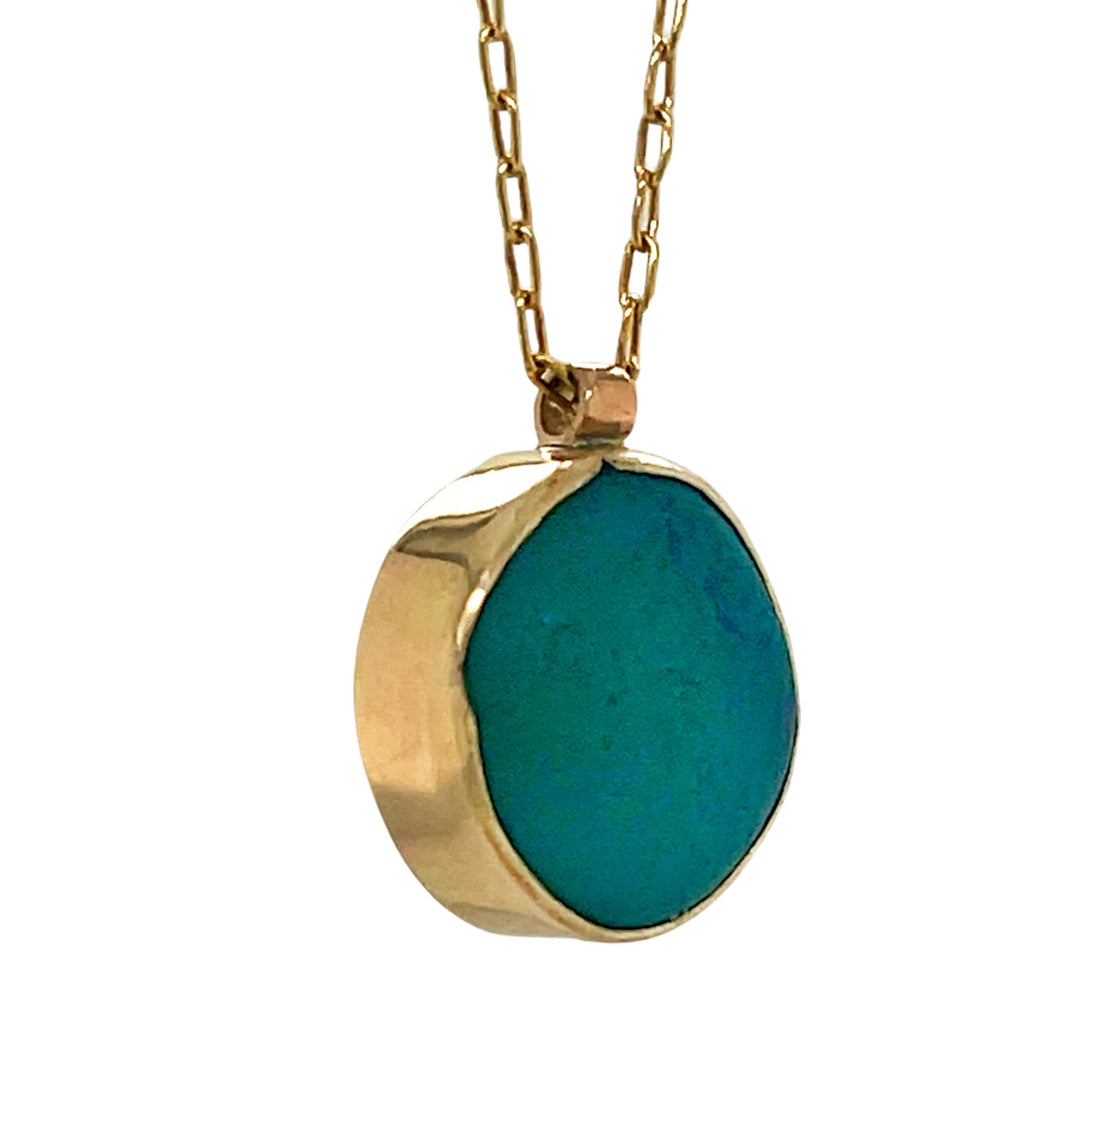 emerald green sea glass necklace, gold bezel necklace